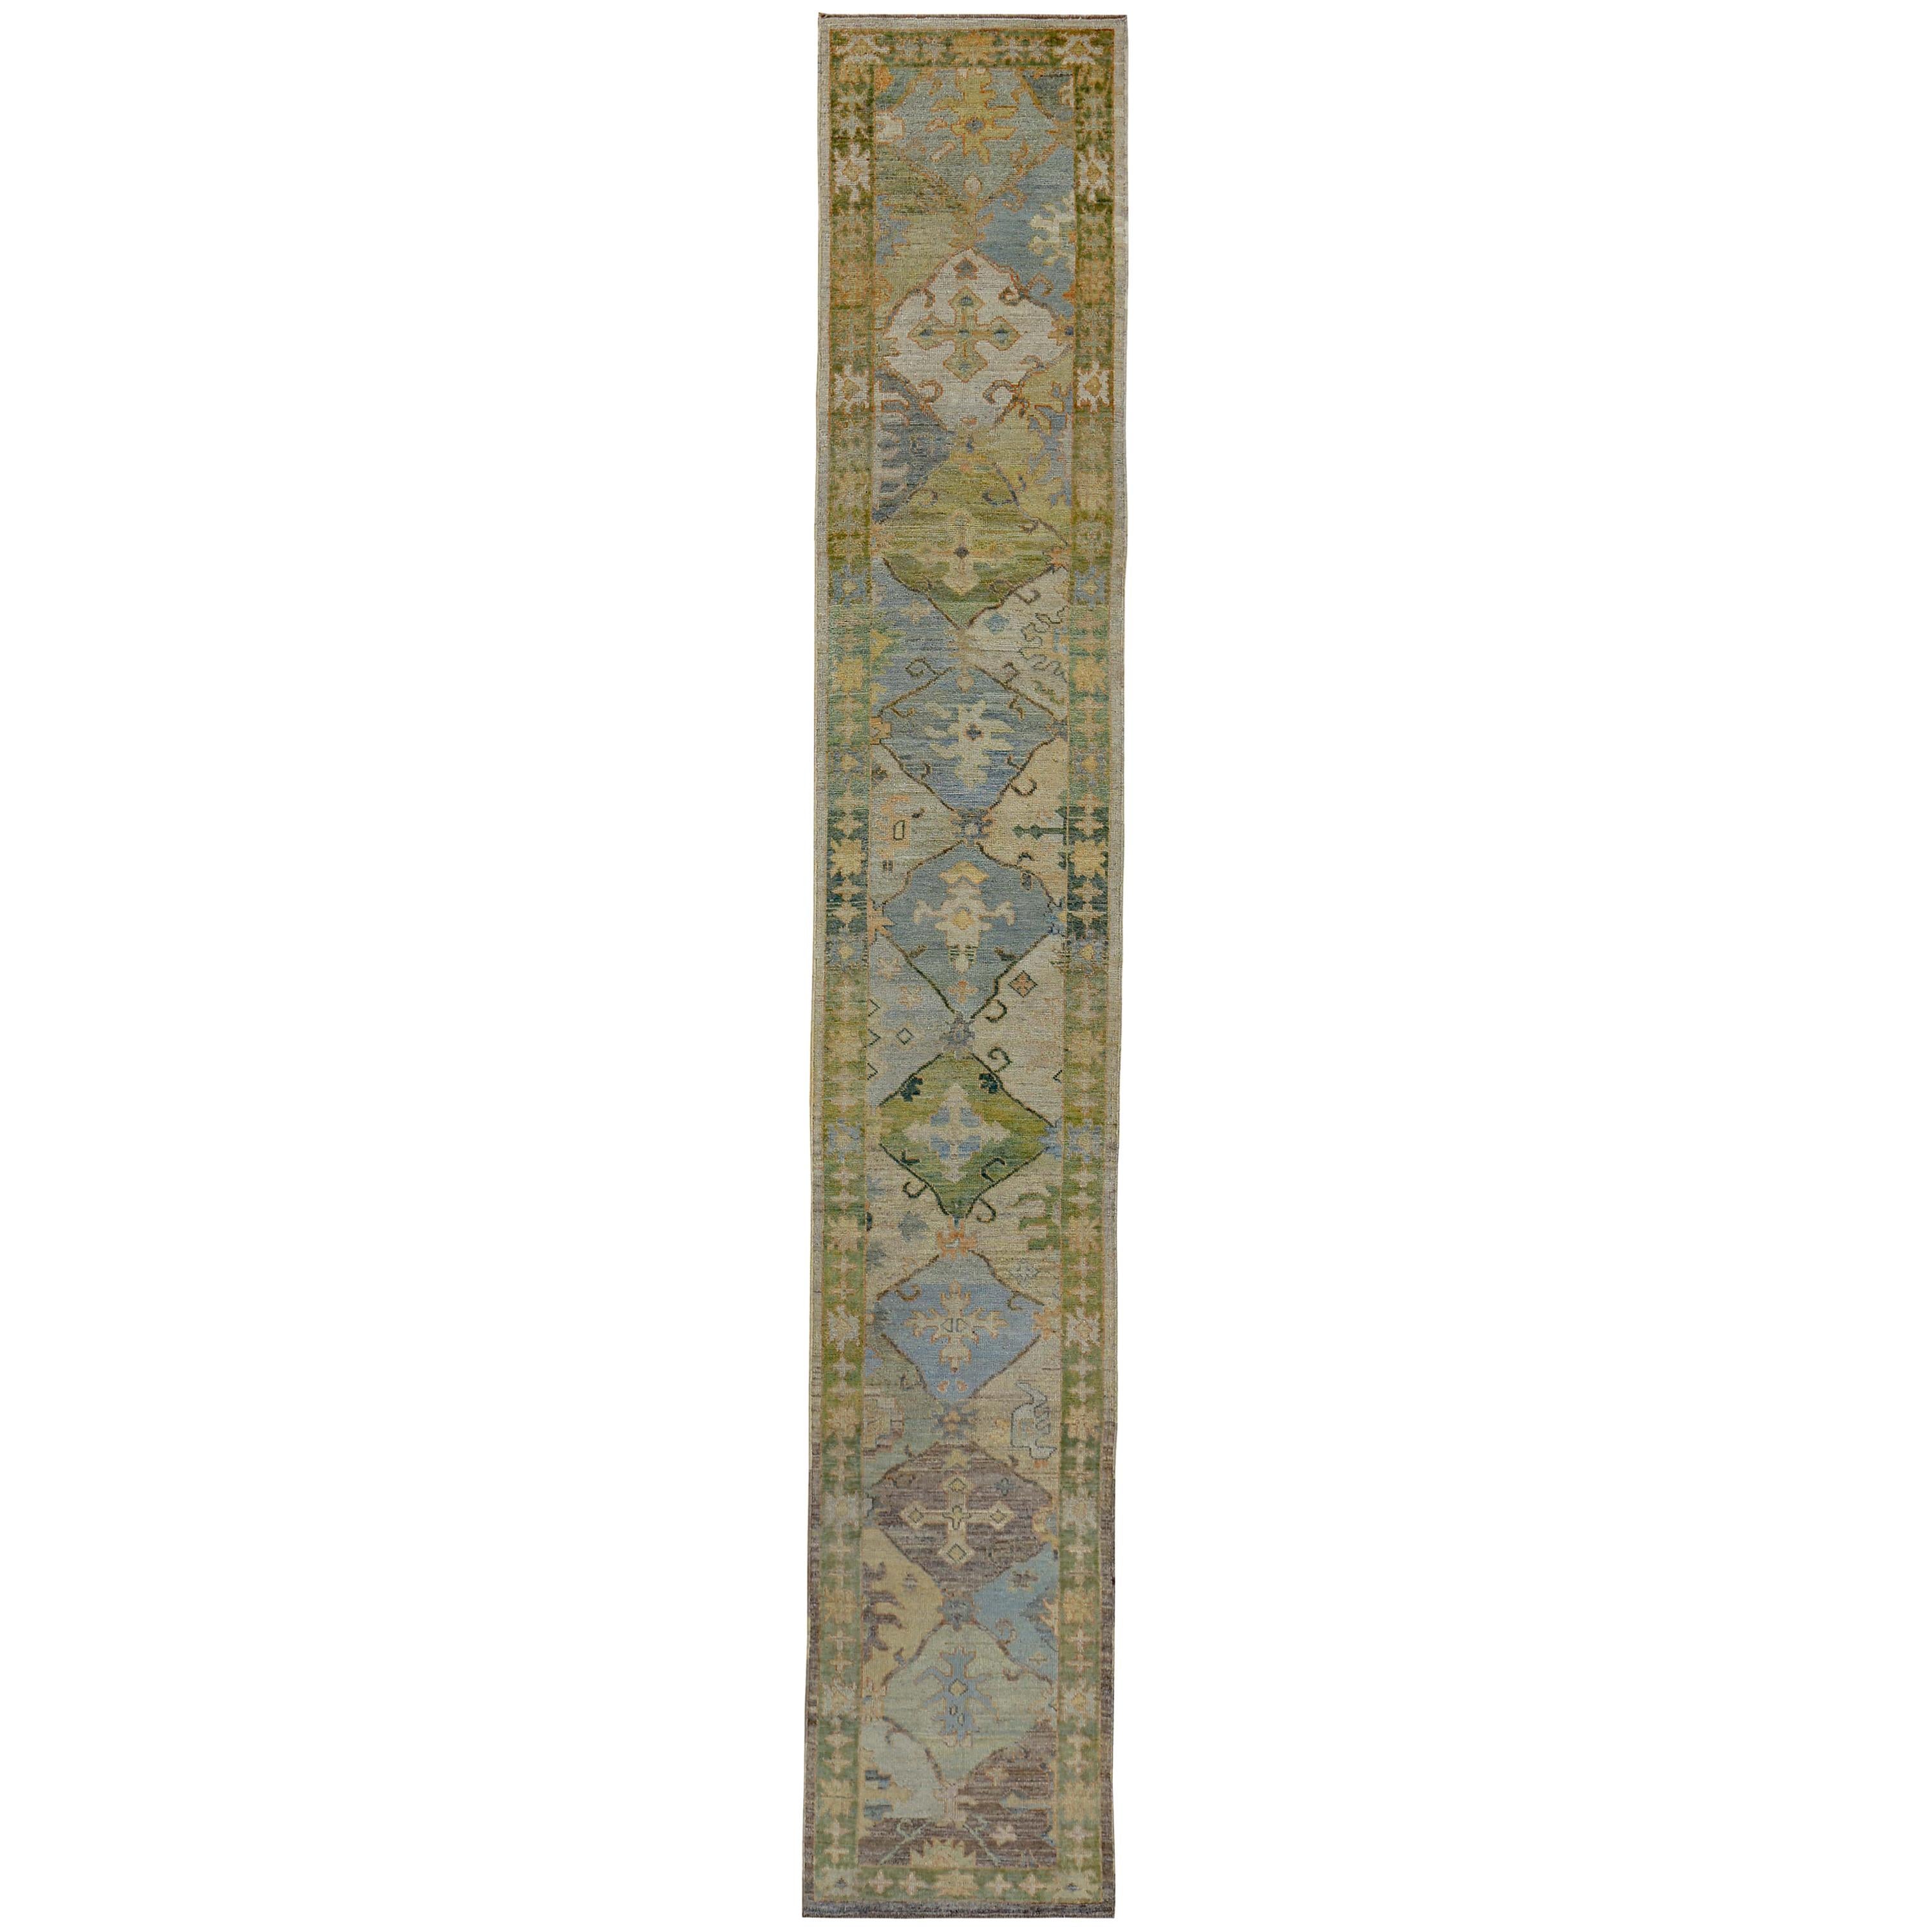 Turkish Oushak Runner Rug with Blue Floral Patterns on Brown and Green Field